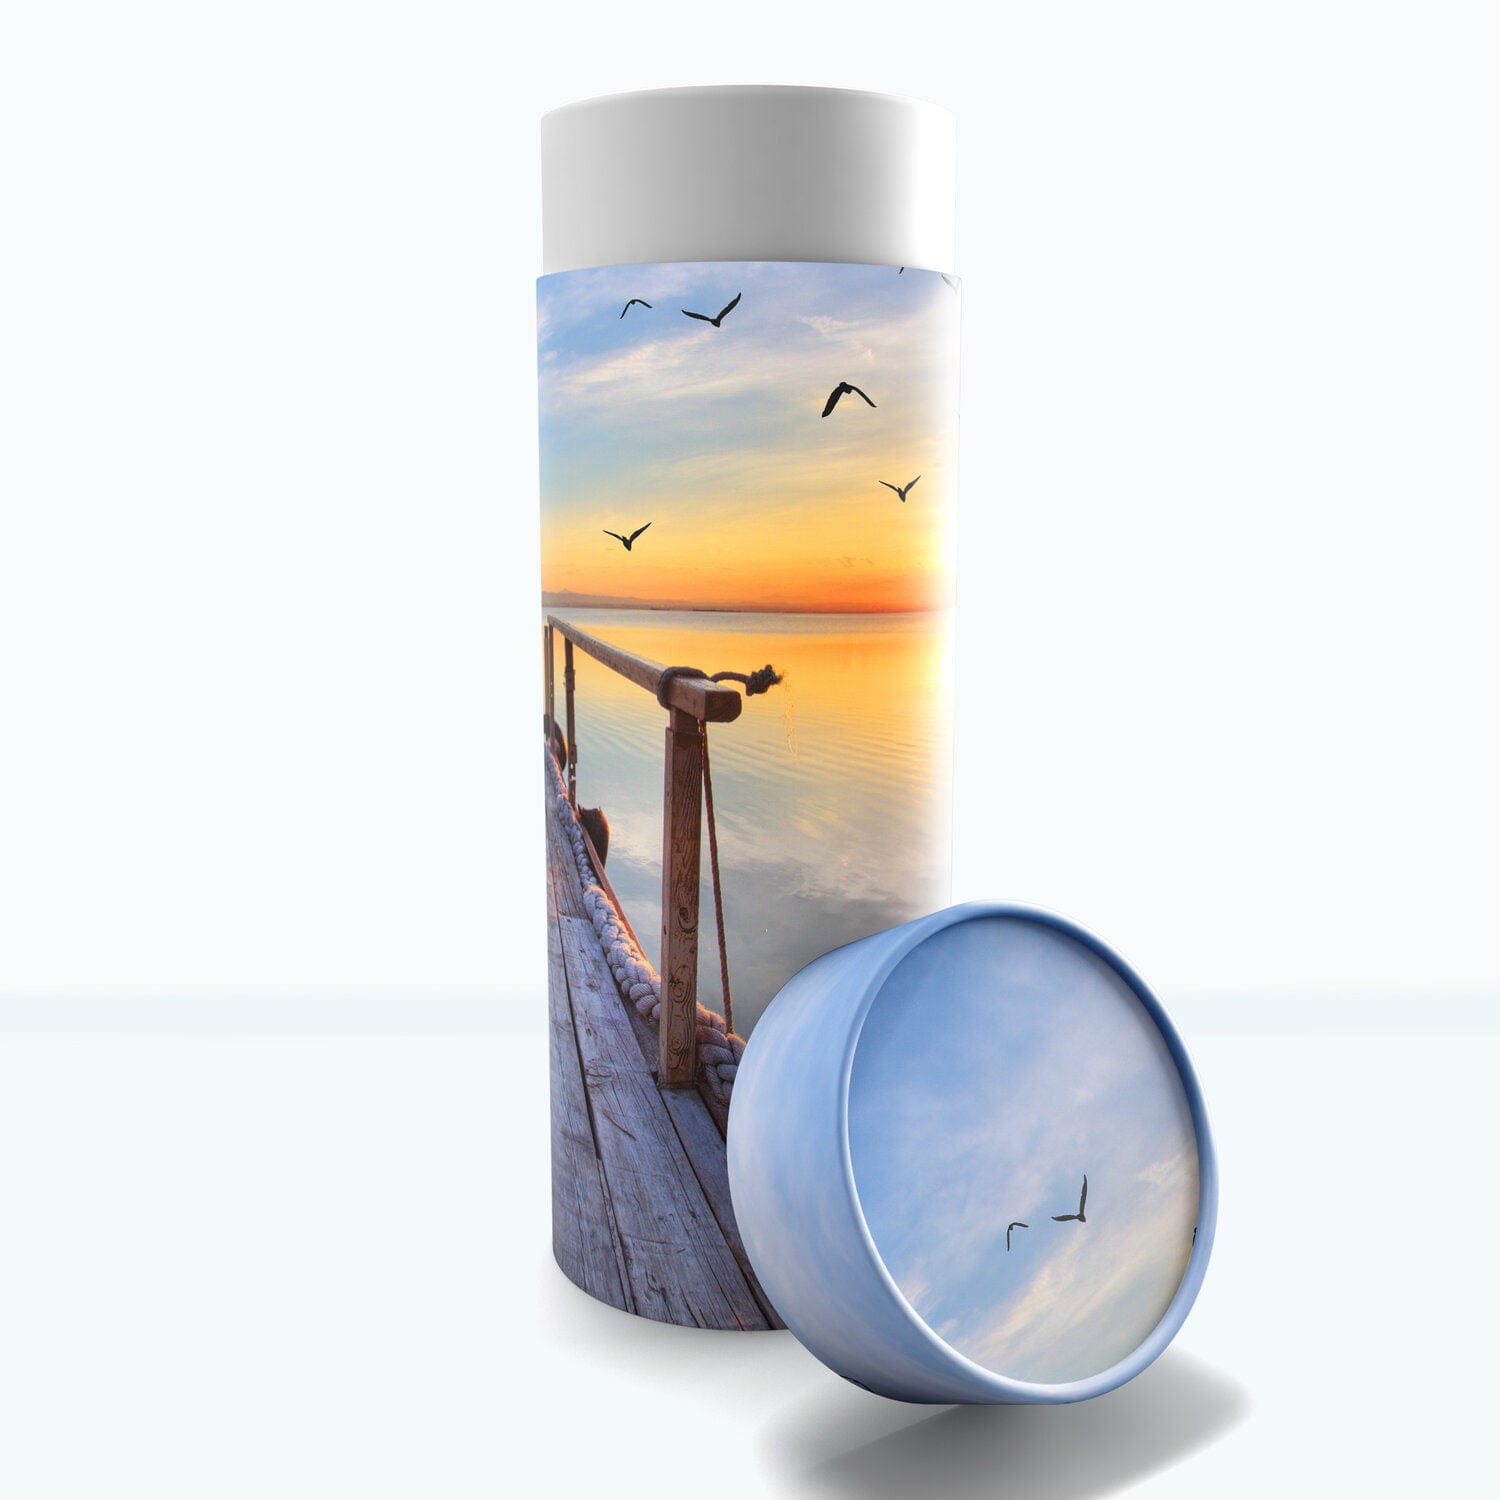 Commemorative Cremation Urns Medium Dock of the Bay Sunset Biodegradable & Eco Friendly Burial or Scattering Urn / Tube